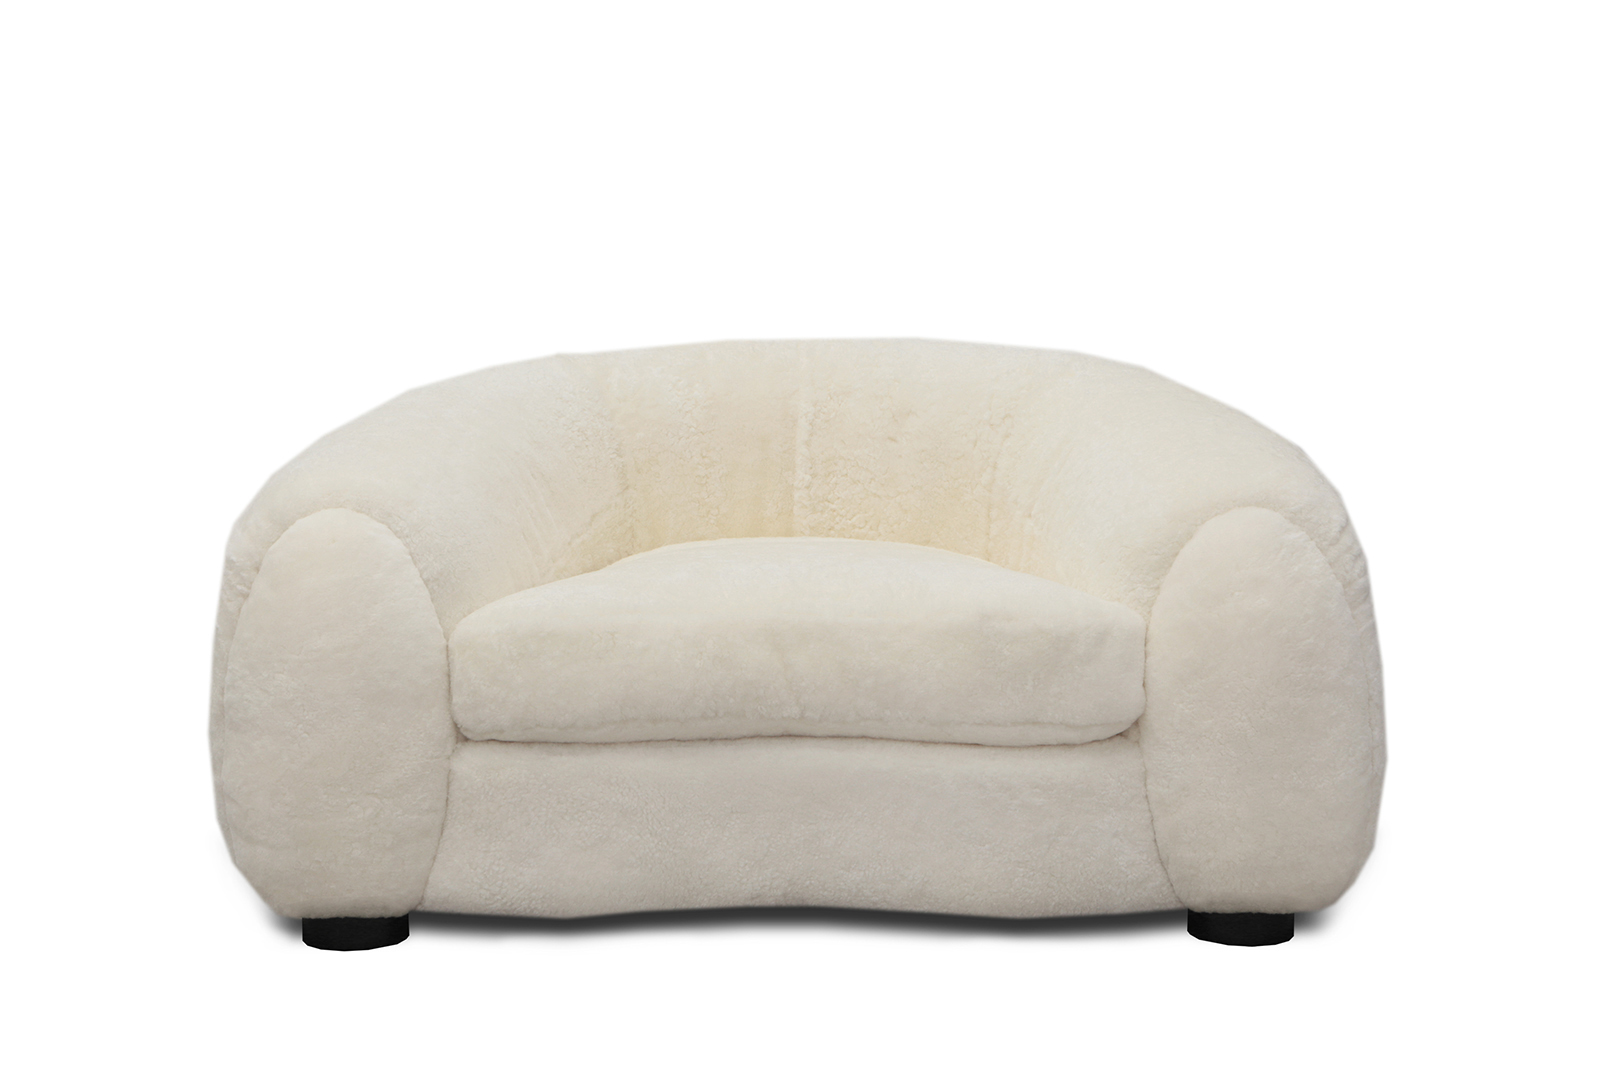 5995 - CURATE DESIGN -AMORE 14 SHEARLING IVORY 1